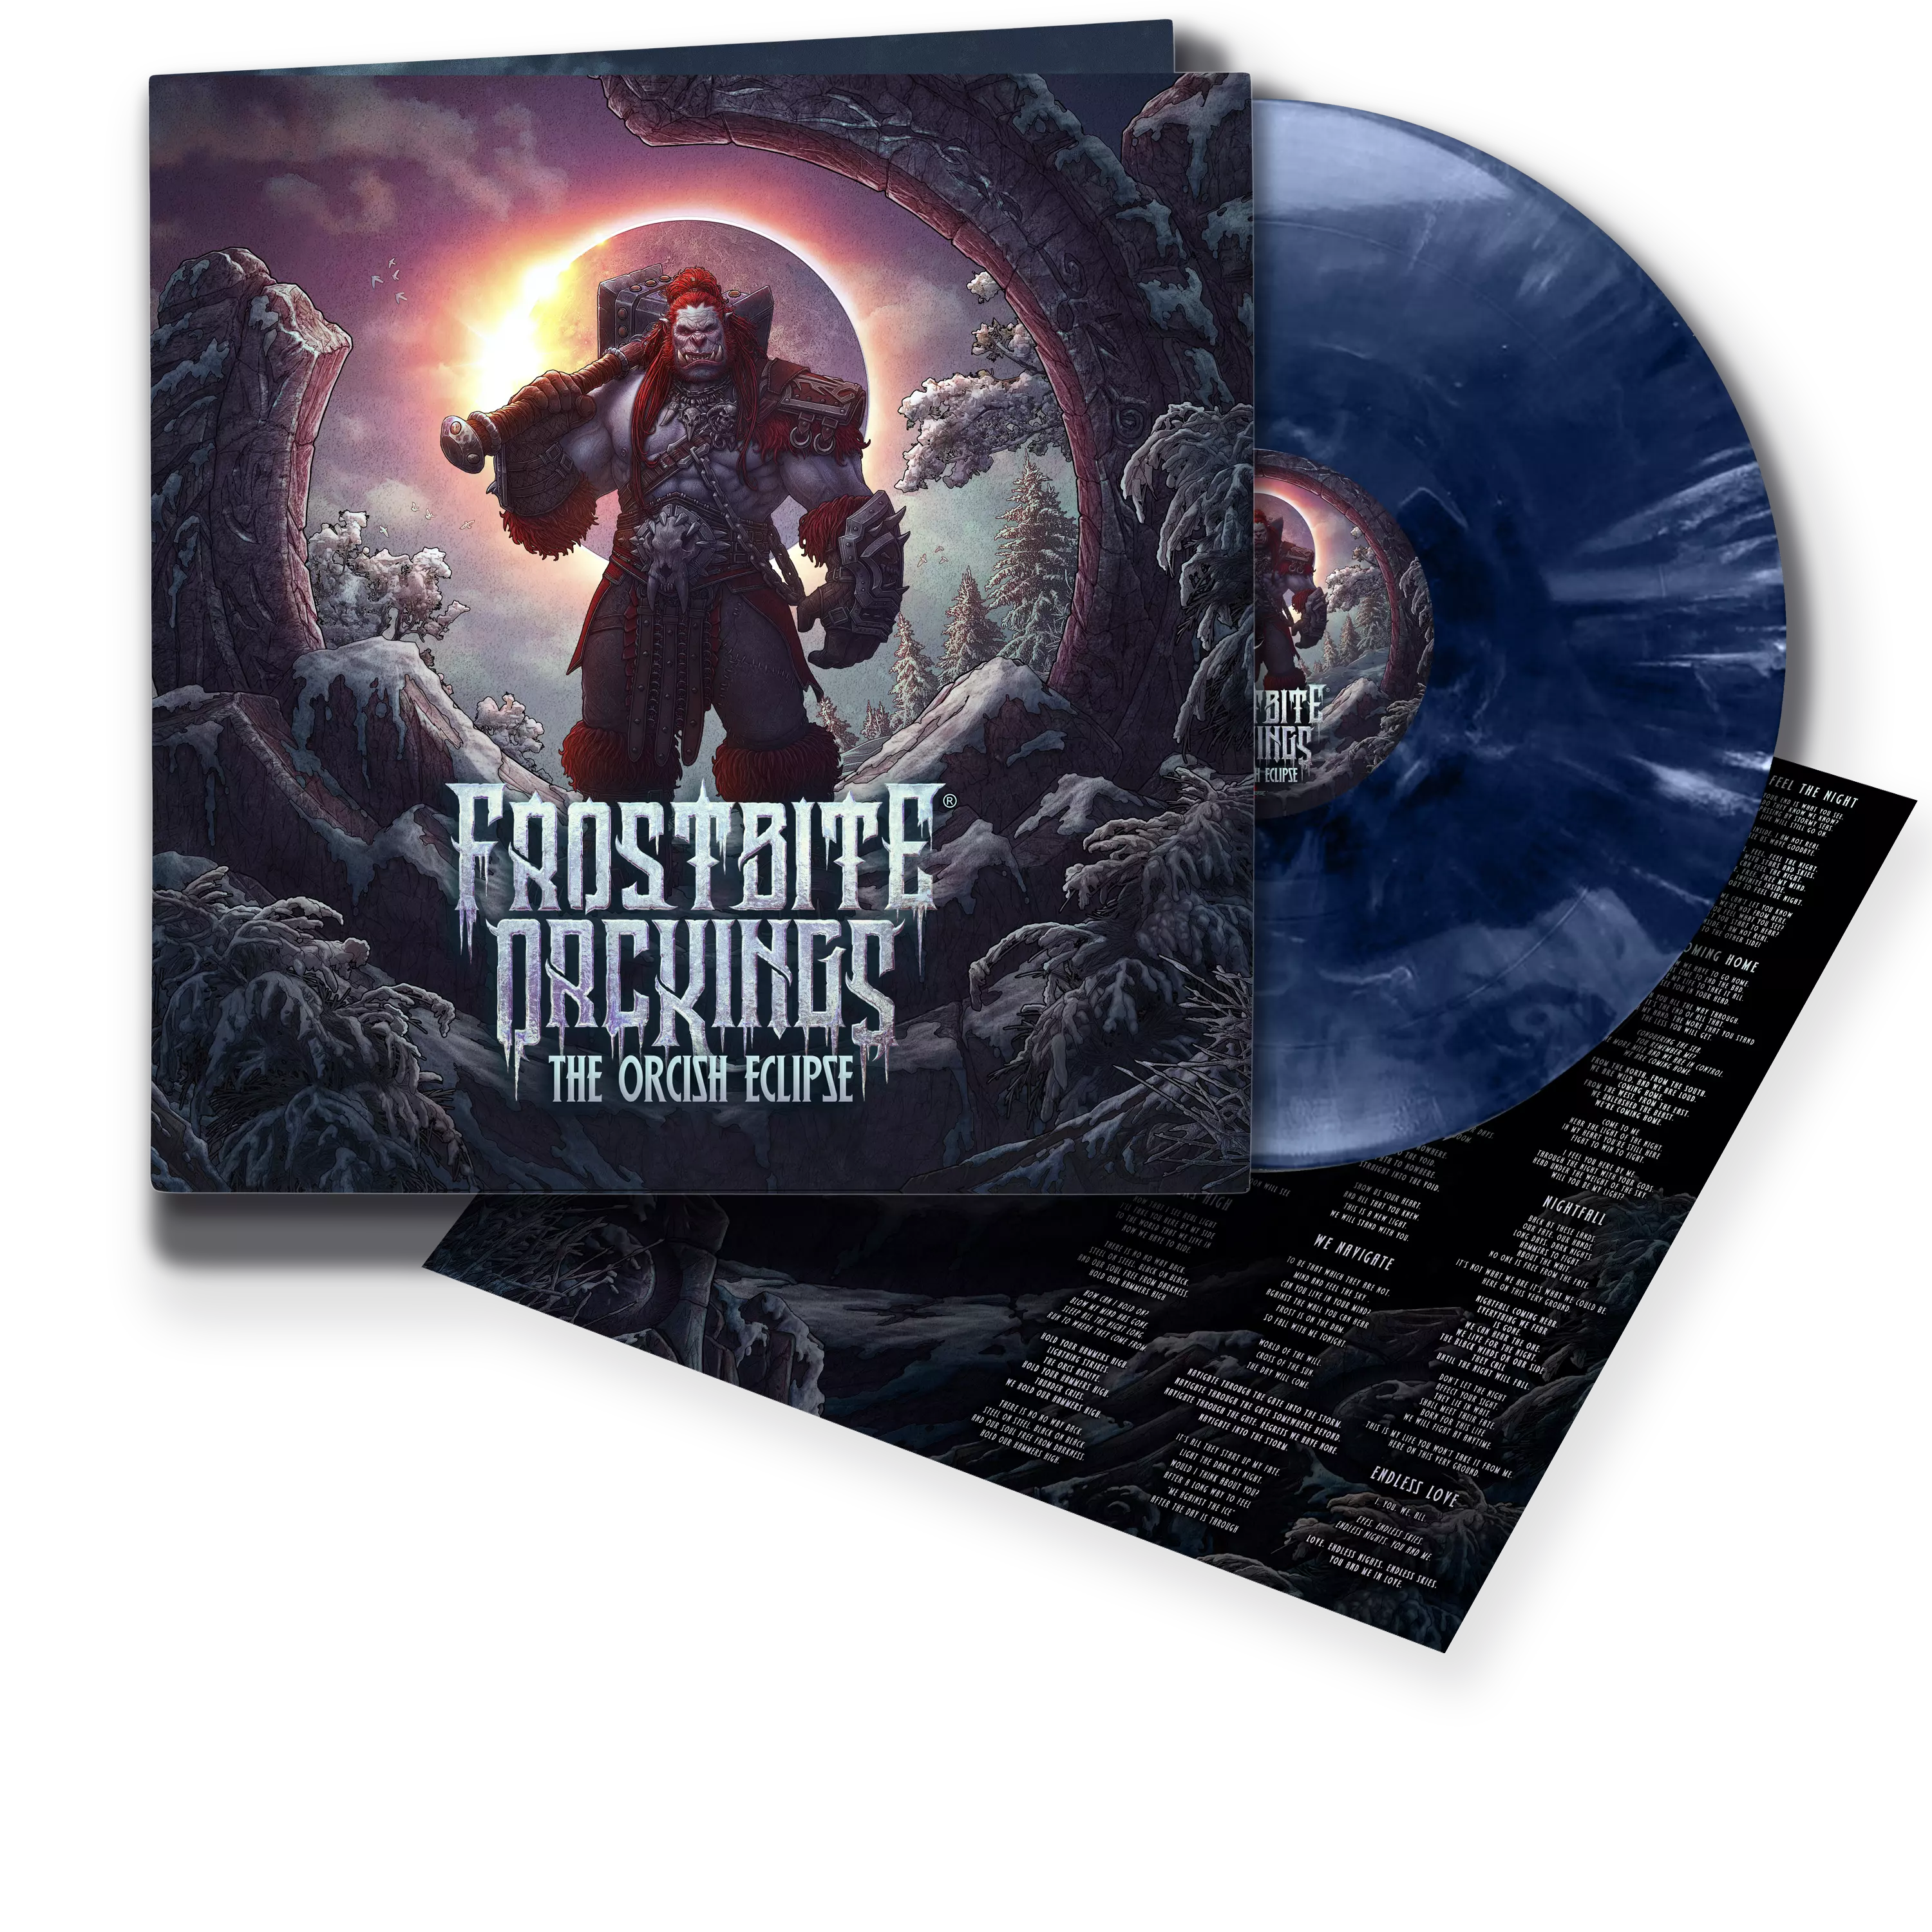 FROSTBITE ORCKINGS - The Orcish Eclipse [DEEP FROST BLUE VINYL LP]